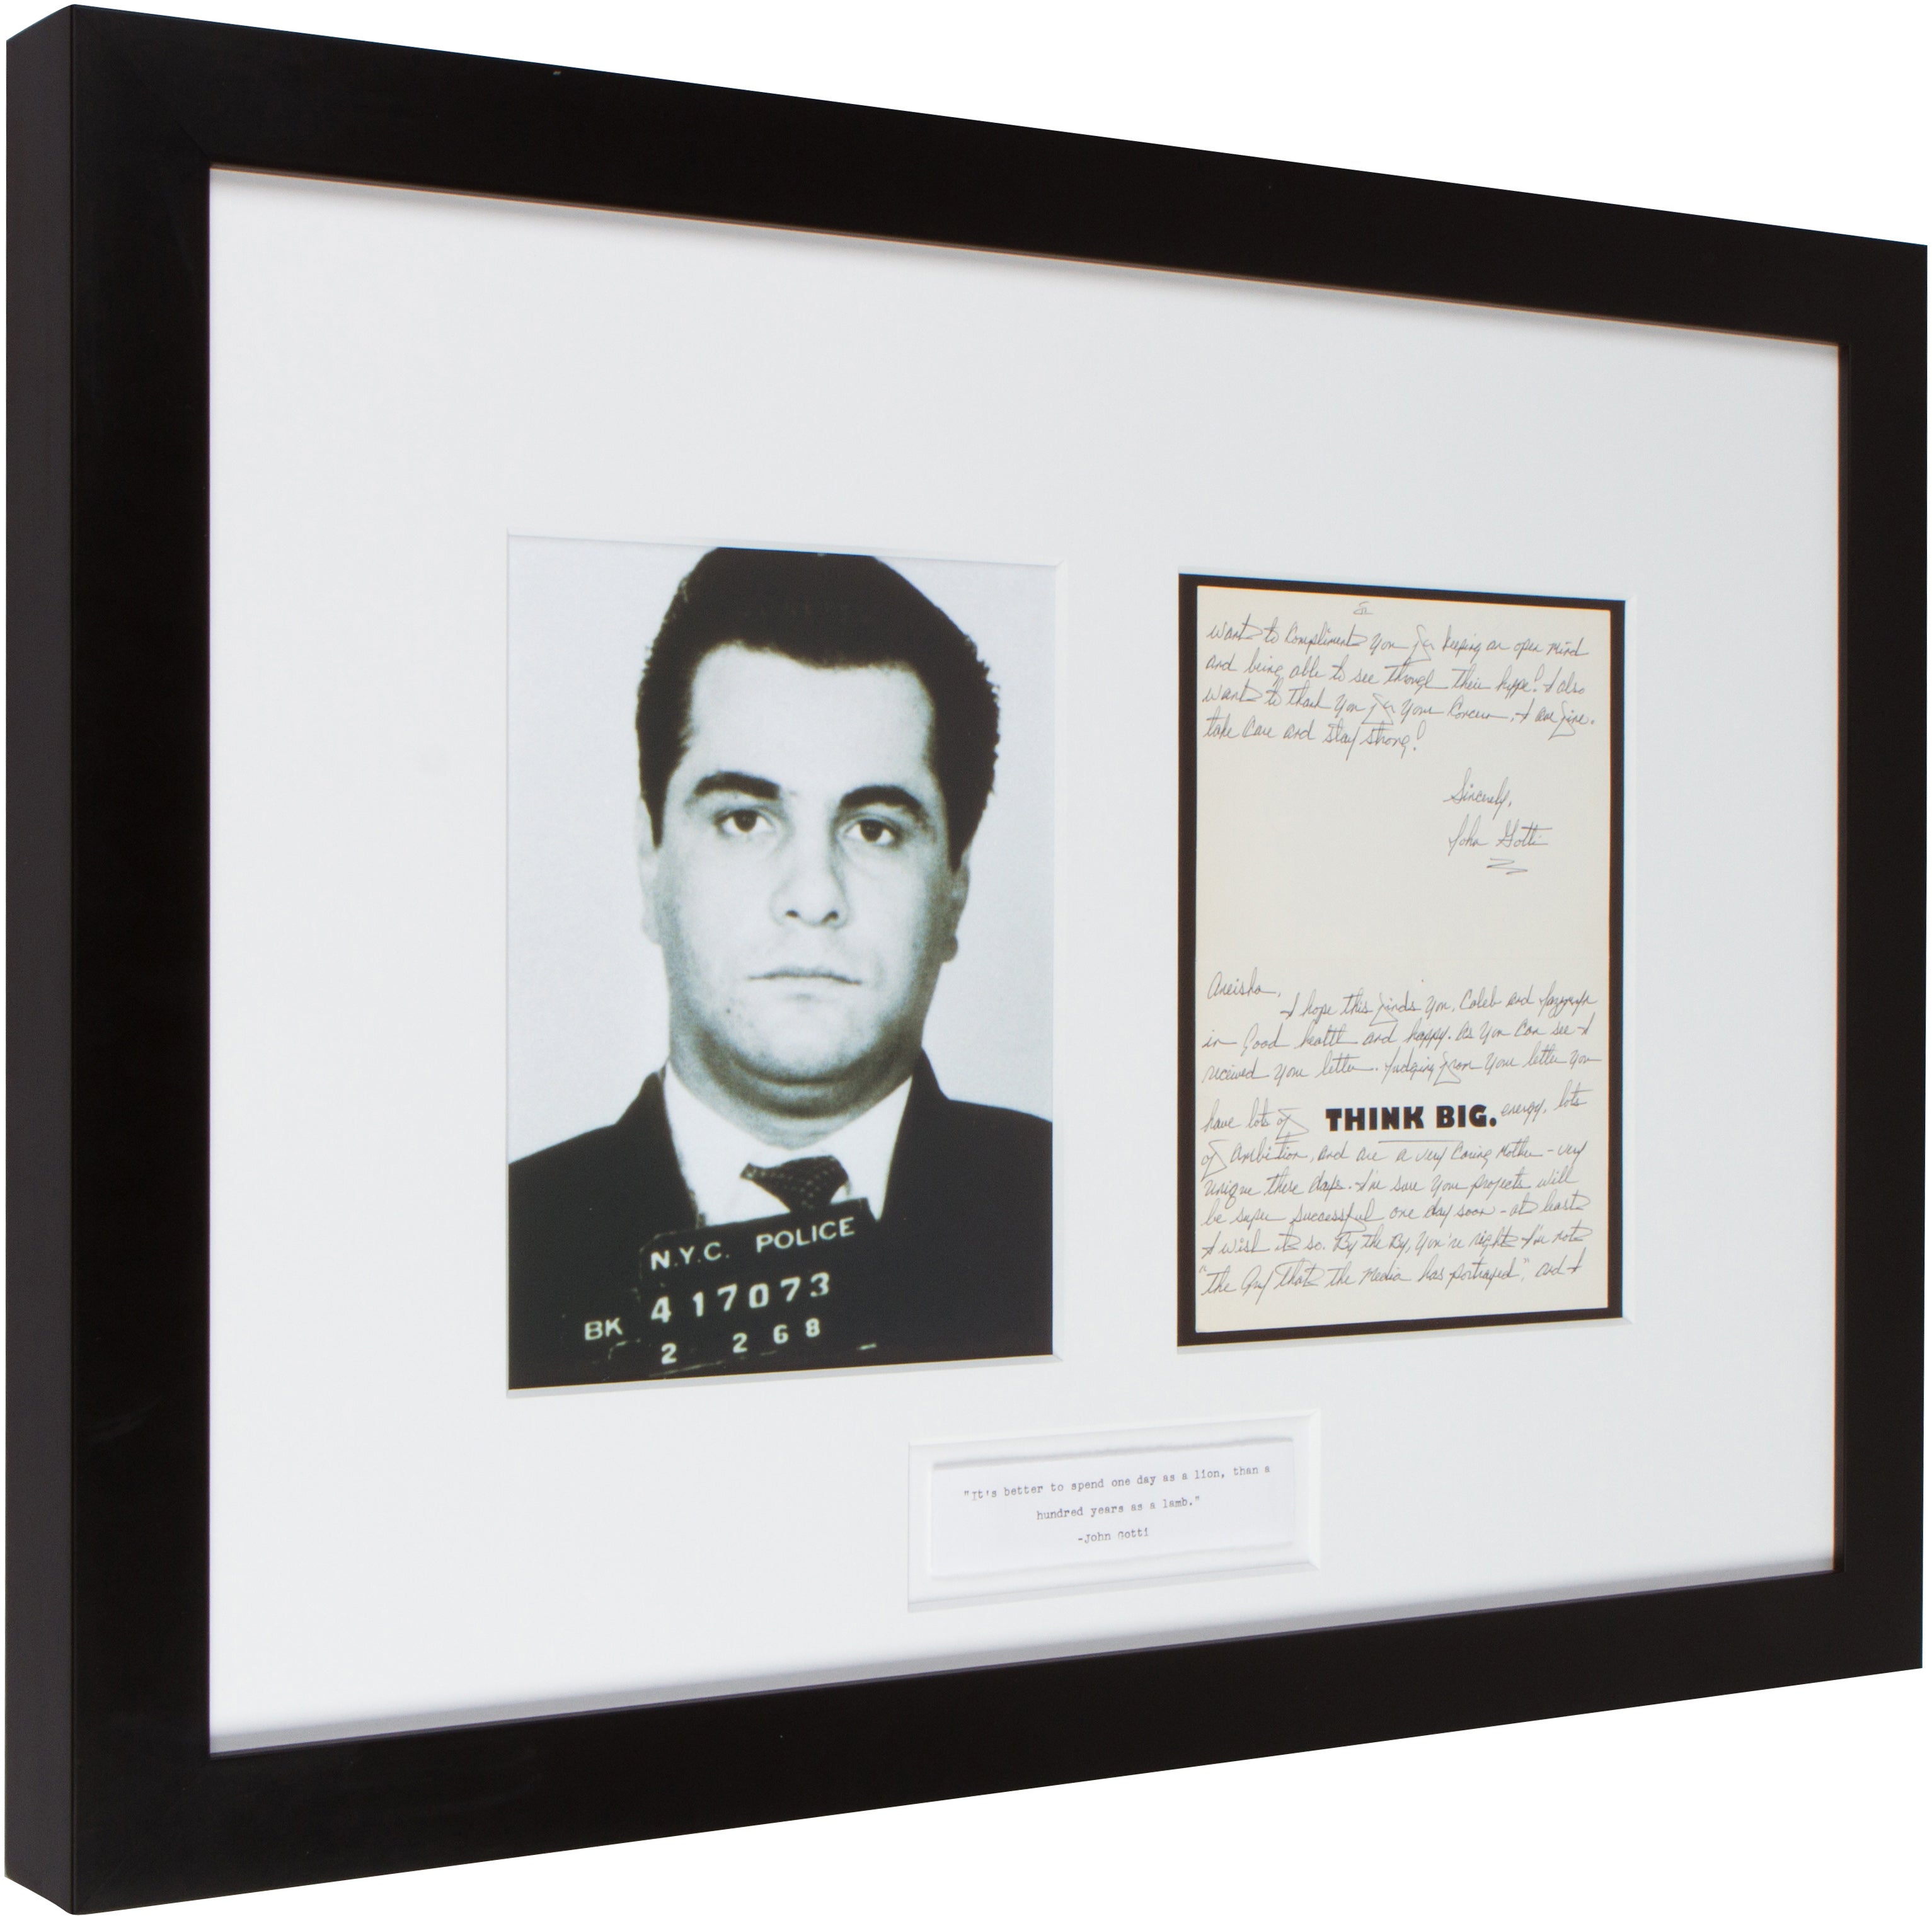 Rare John Gotti Signed: “Think Big” “ I’m sure your projects will be super successful…” “Stay strong”